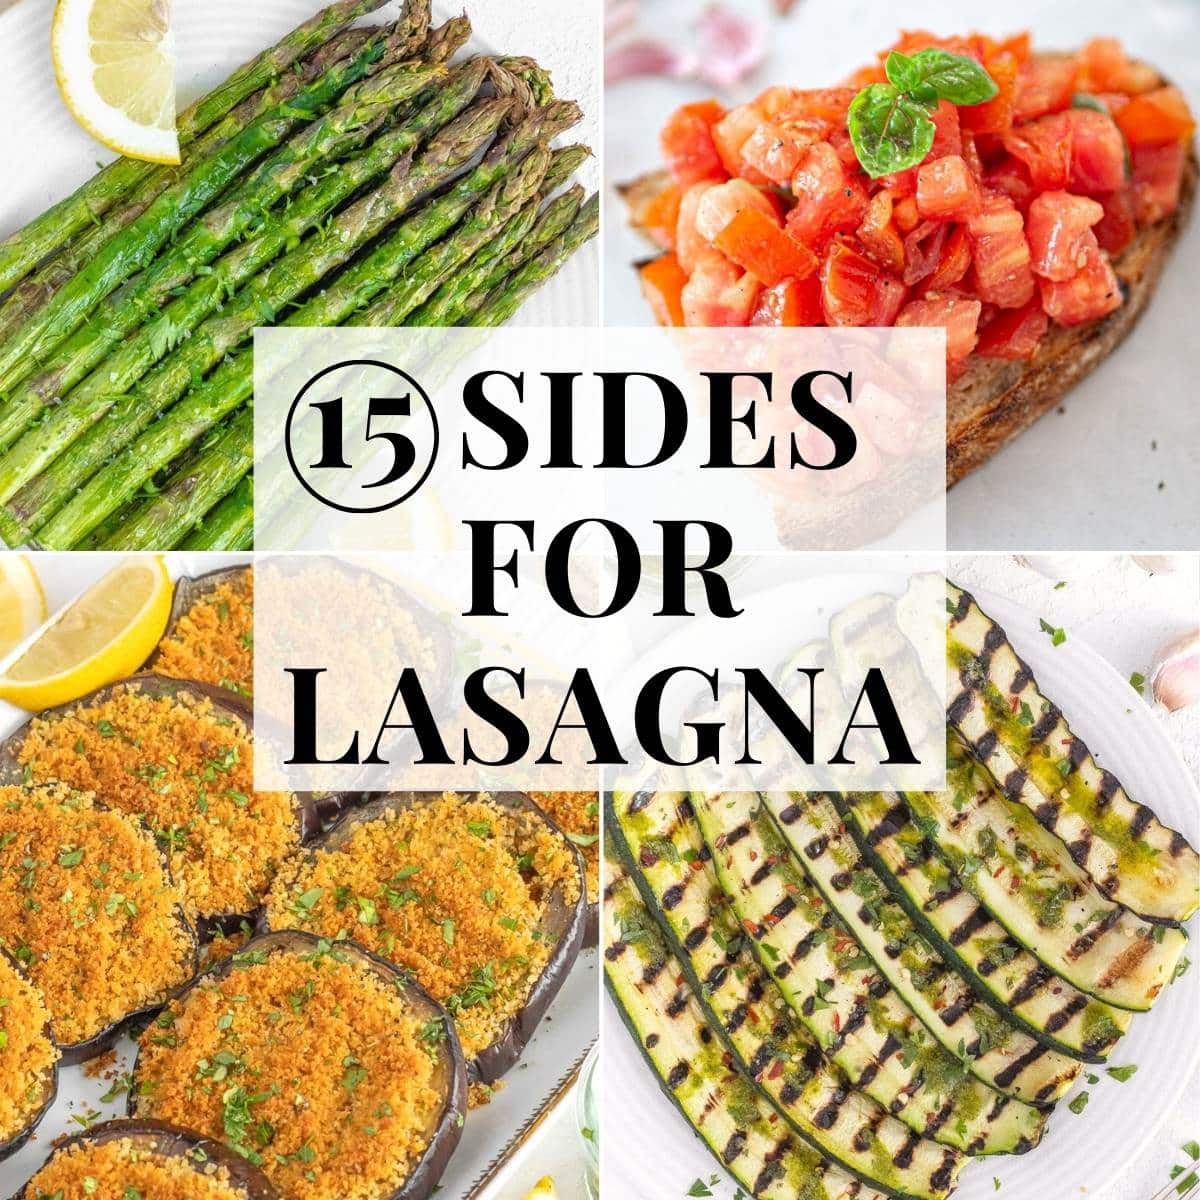 15 sides to serve with lasagna